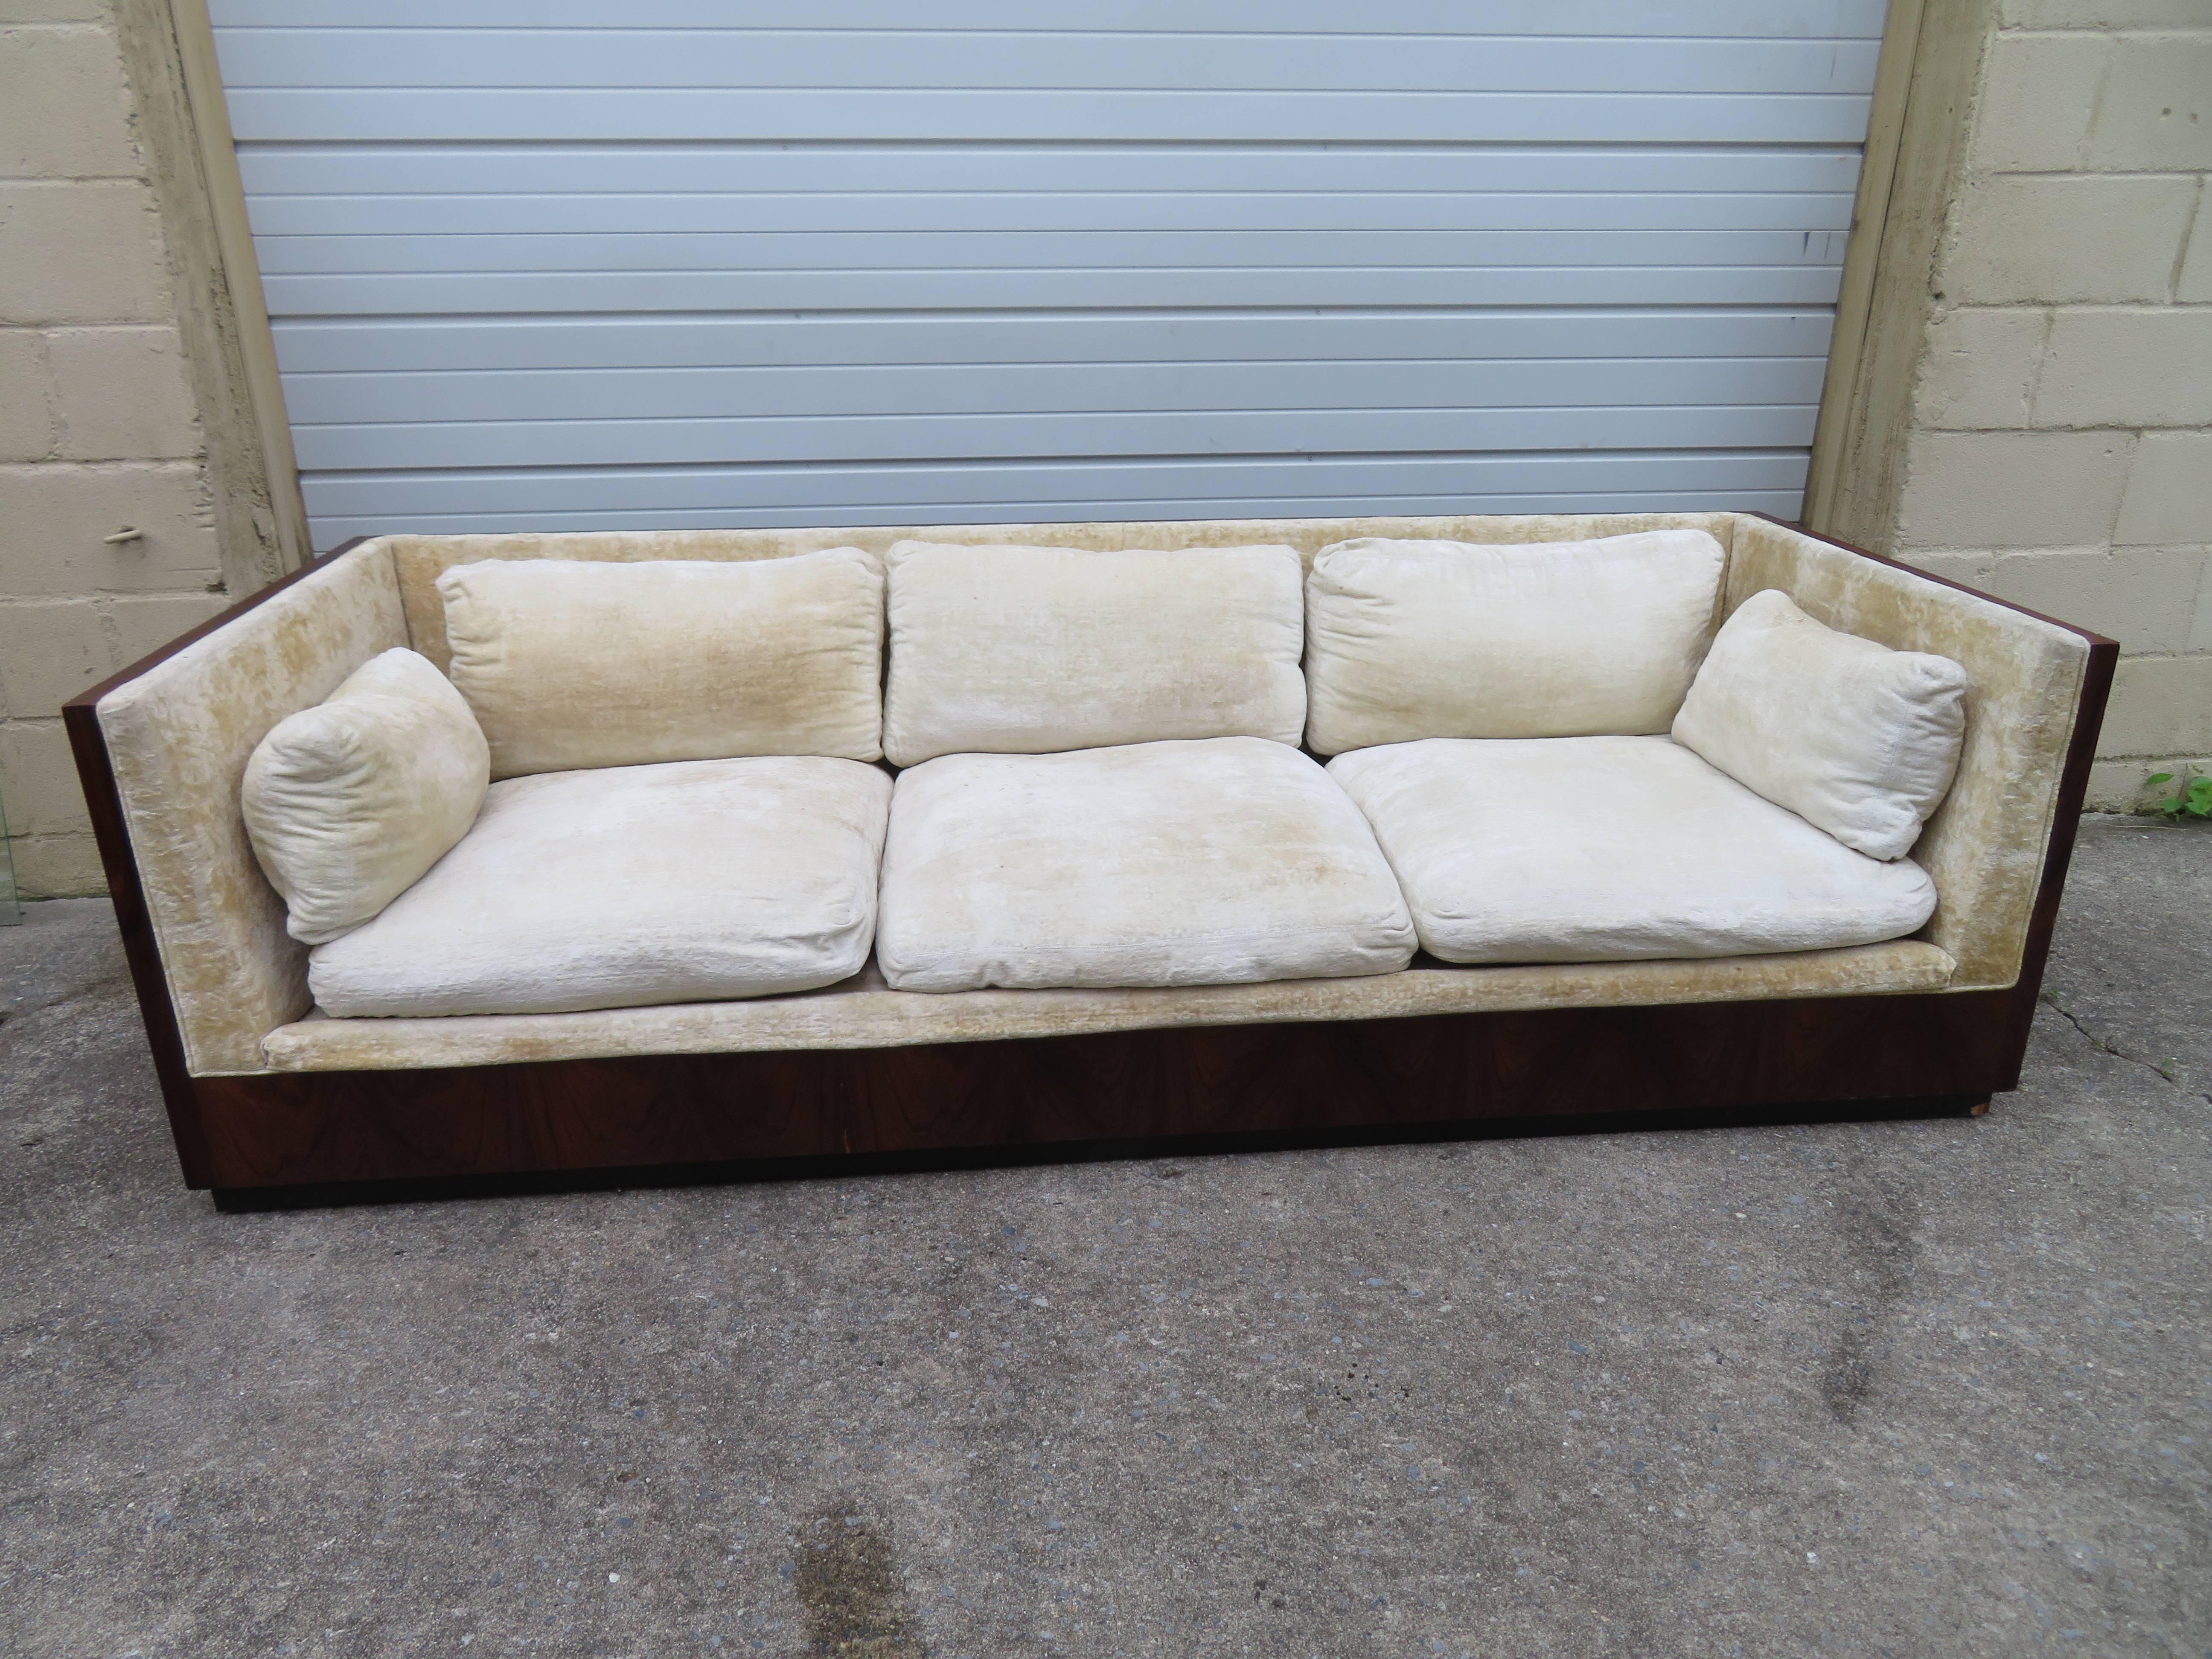 Simply gorgeous Milo Baughman rosewood case sofa. The back is stunning with nicely figured rosewood veneer. This piece will need to be reupholstered but that's what you designers are looking for anyway-right? The rosewood case is in fantastic